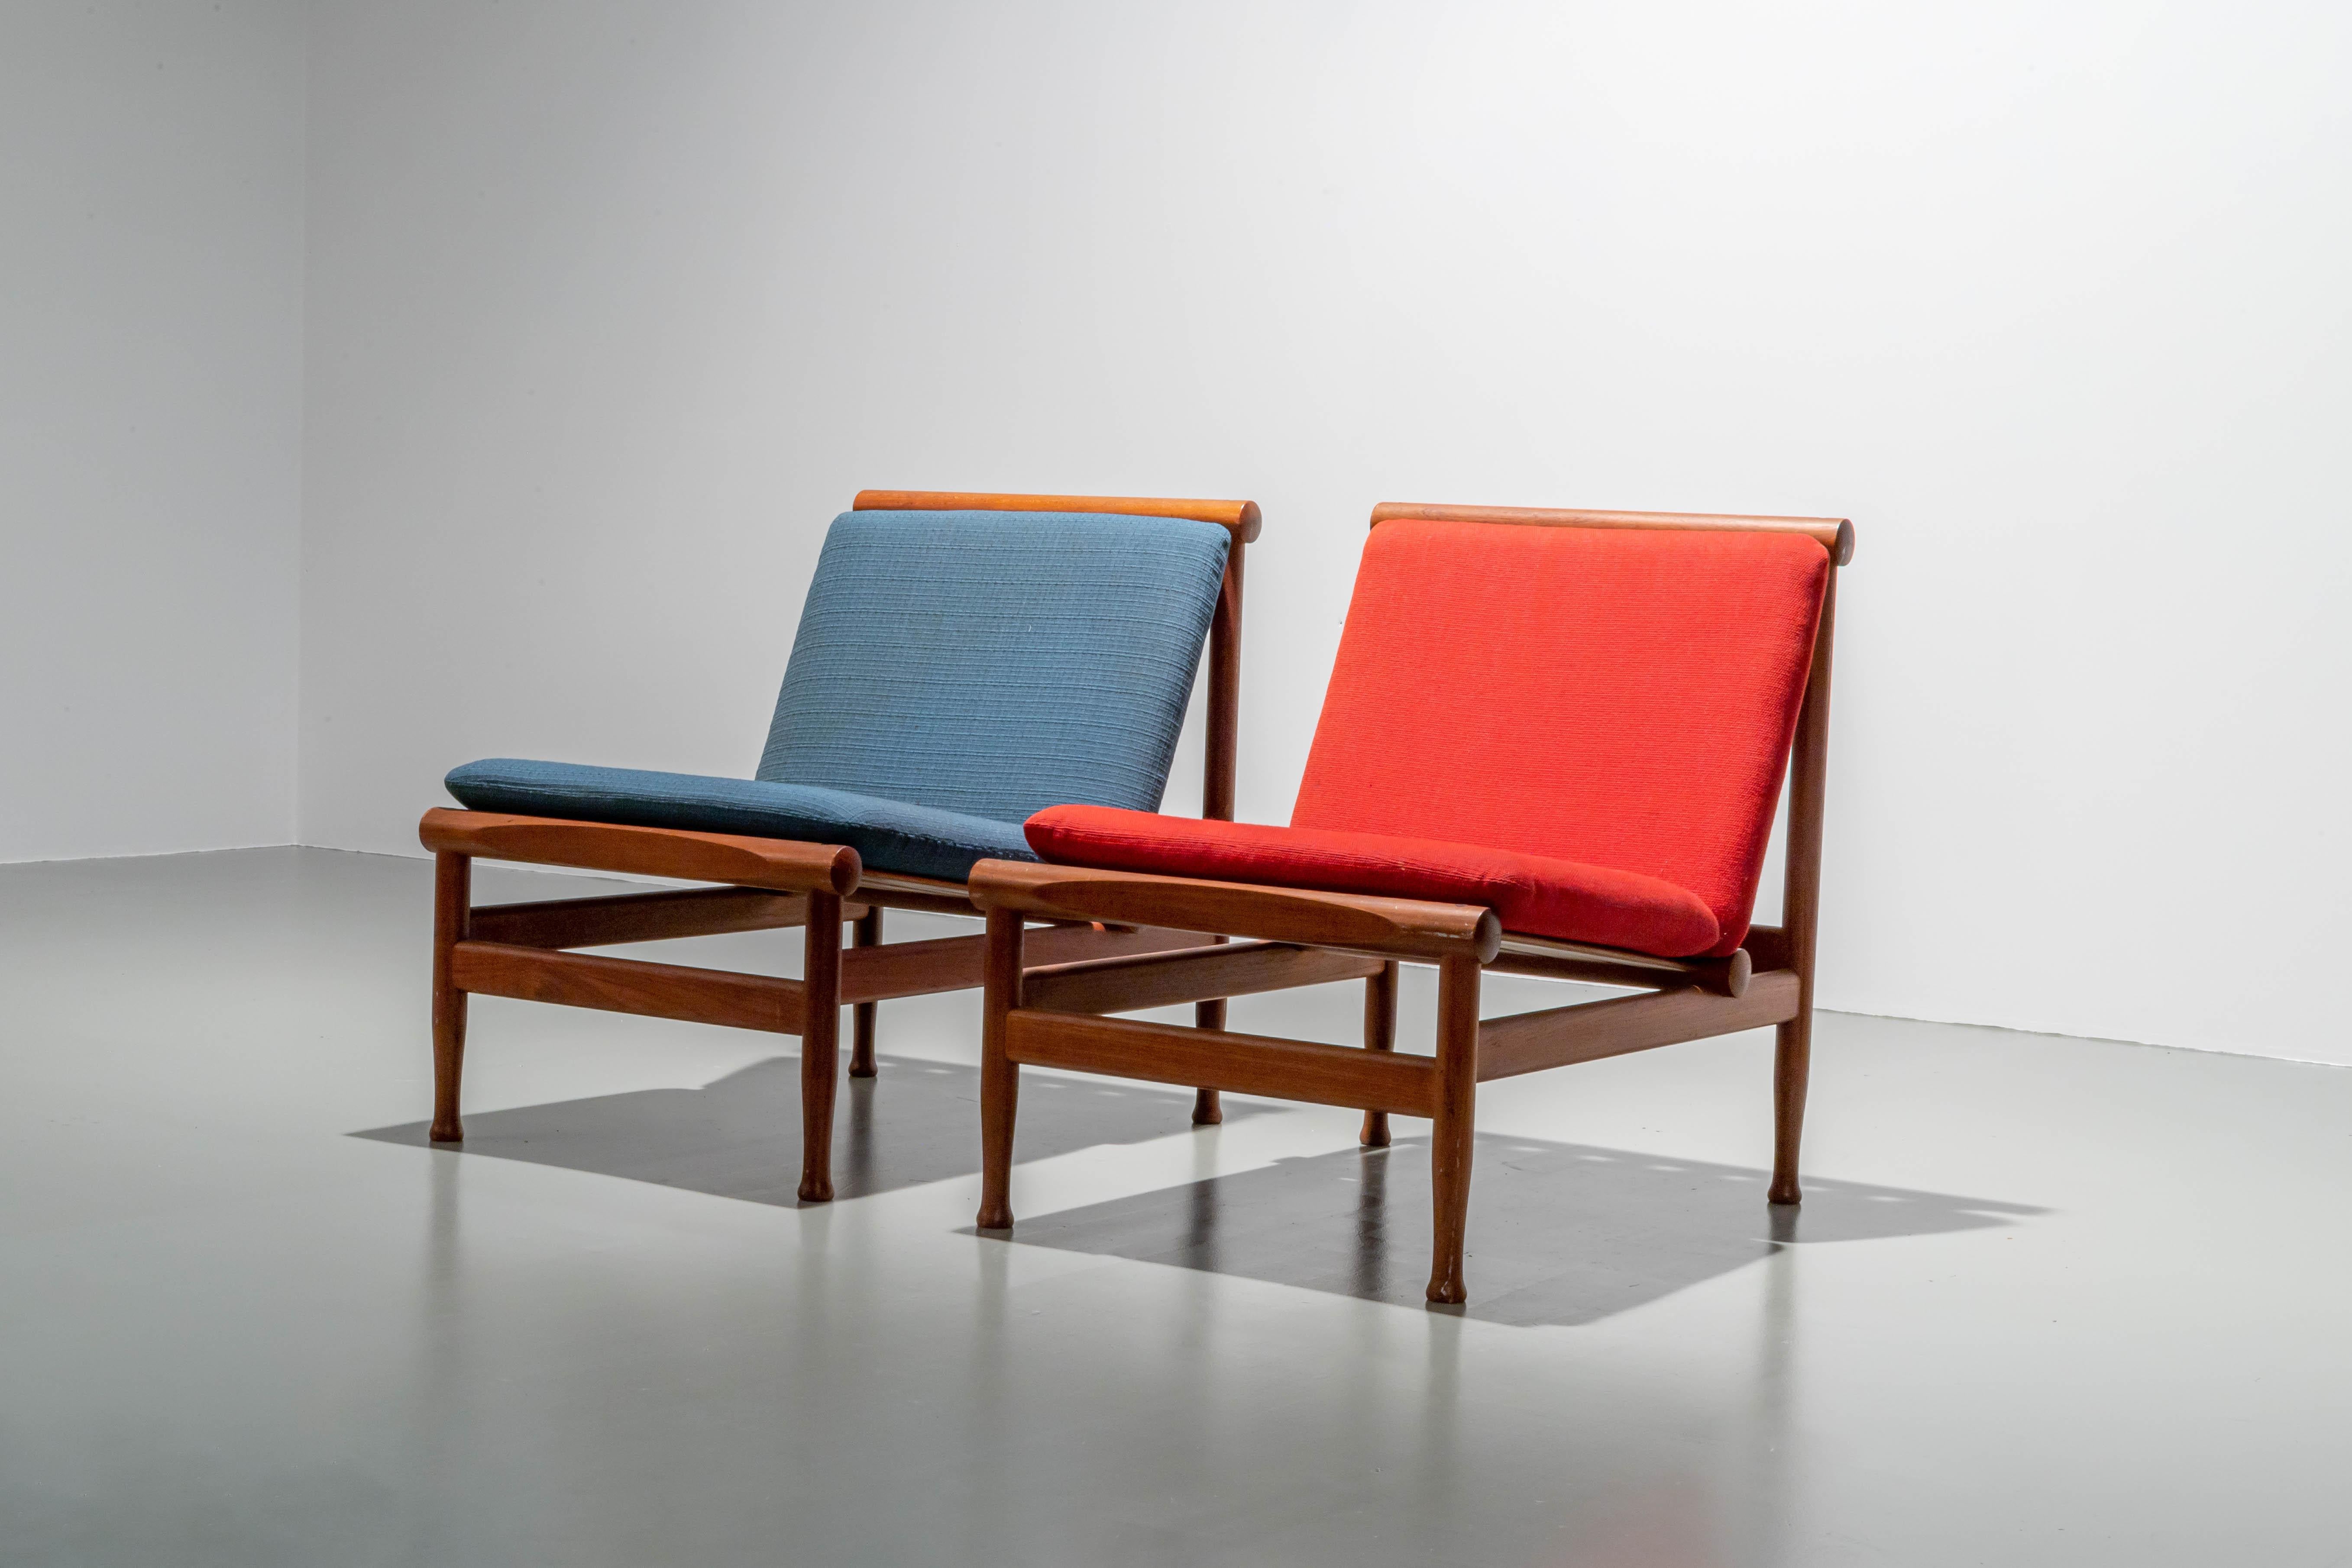 Famous model 501 teak lounge chair, also known as the 'Japan' chair, for Søborg Møbler by Kai Lyngfeld Larsen.
Very comfortable and sturdy set of 2 lounge chairs, that can also be used as modules to create a smaller benche or one larger for example